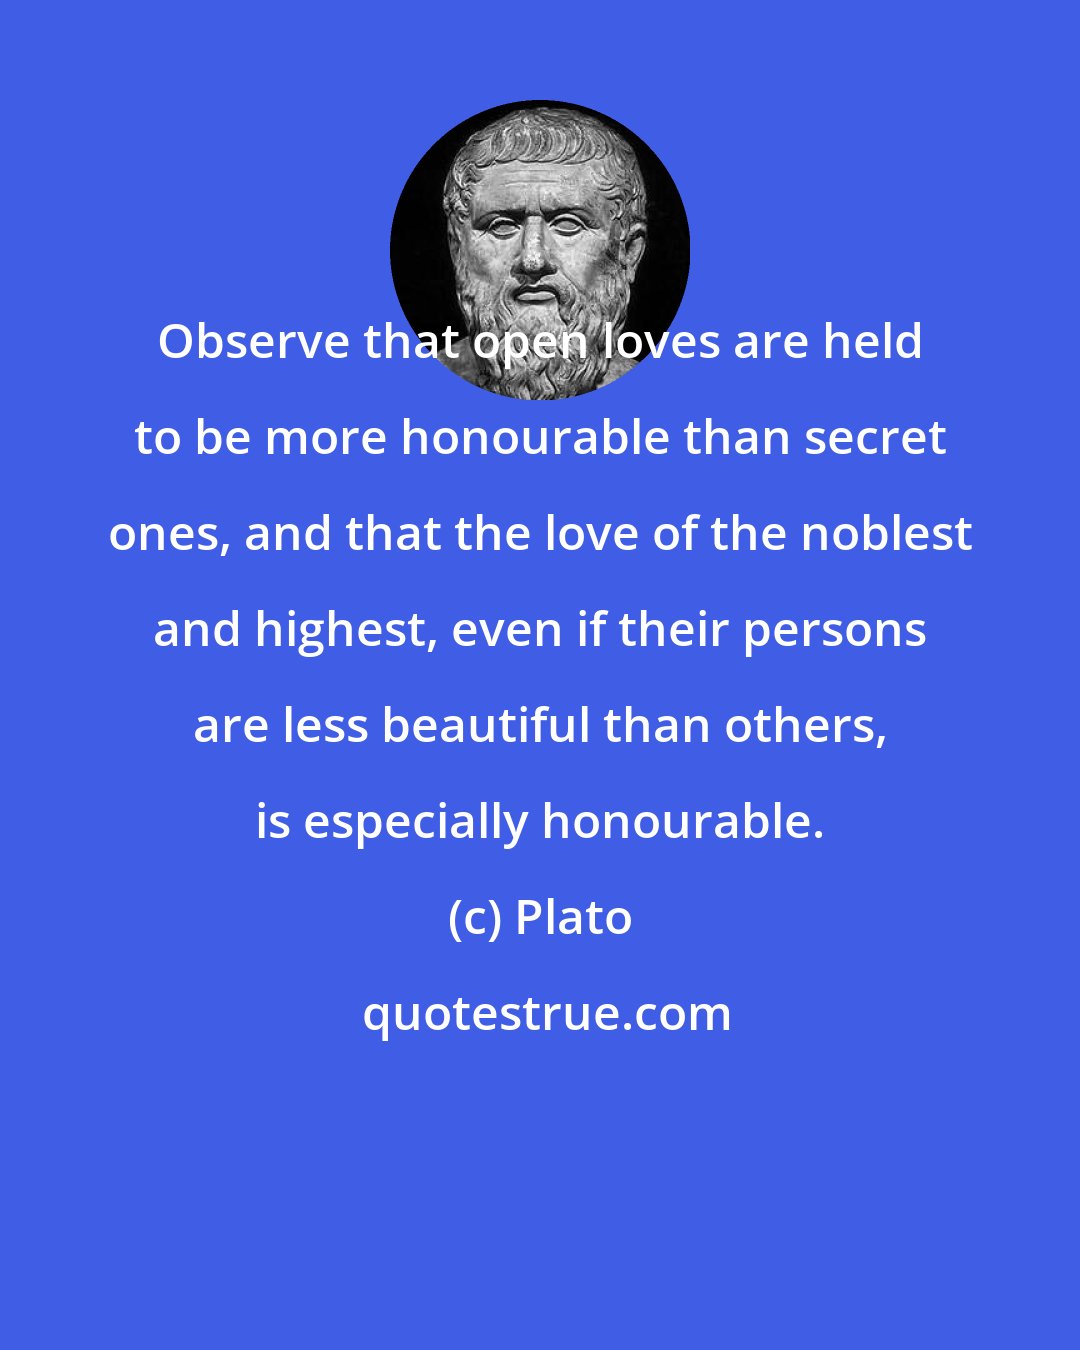 Plato: Observe that open loves are held to be more honourable than secret ones, and that the love of the noblest and highest, even if their persons are less beautiful than others, is especially honourable.